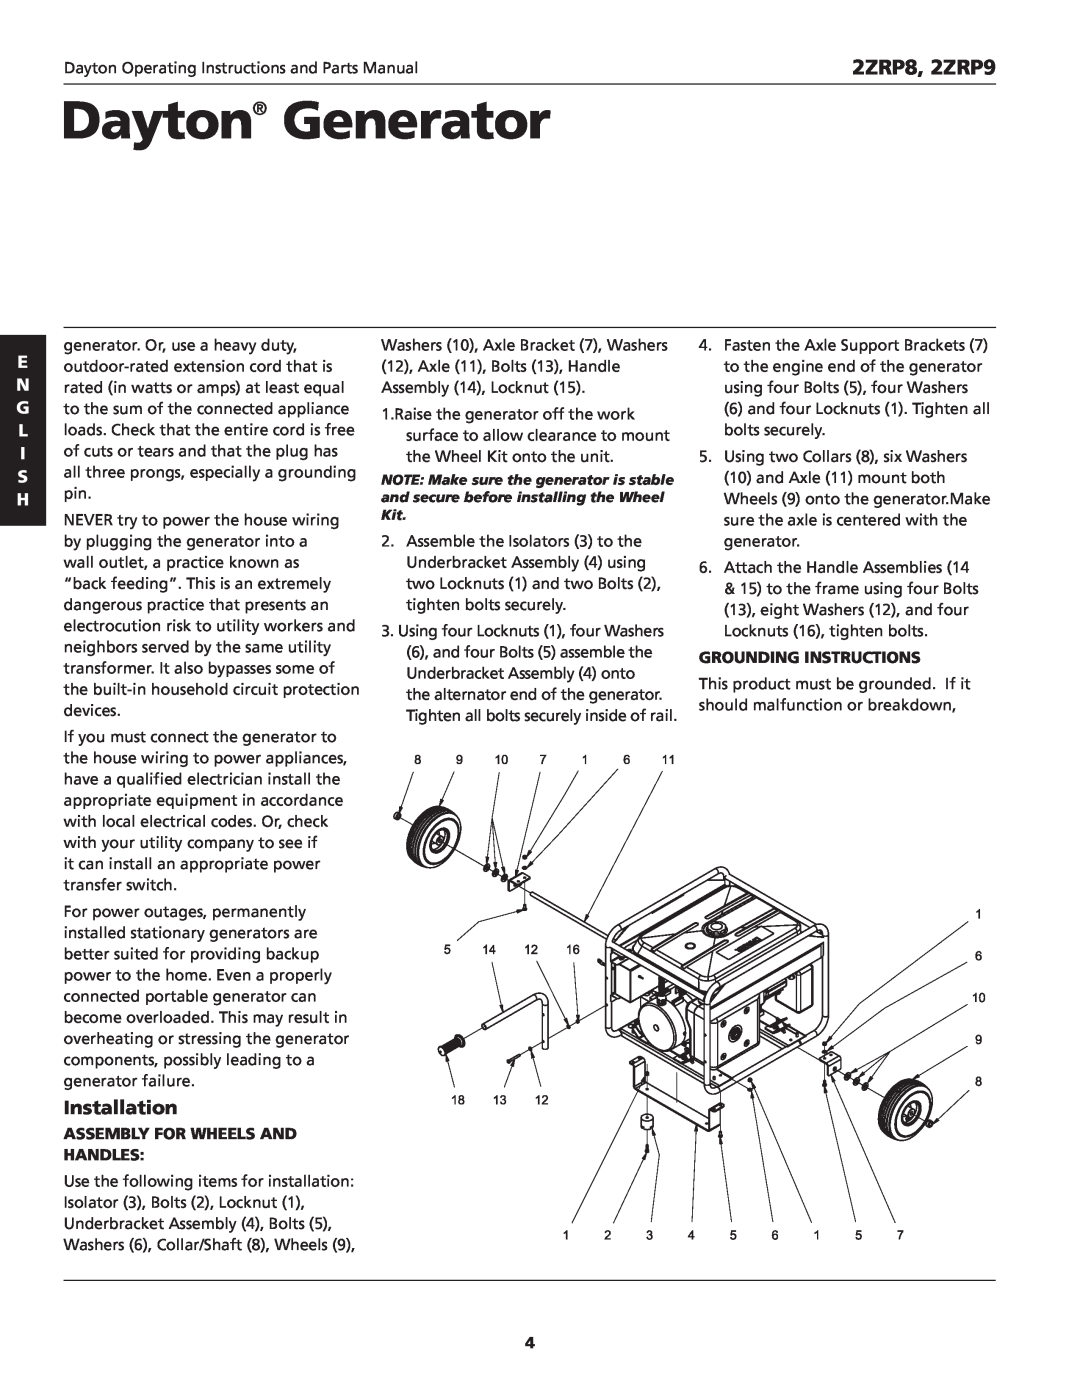 Dayton Installation, Dayton Generator, 2ZRP8, 2ZRP9, Assembly For Wheels And Handles, Grounding Instructions 